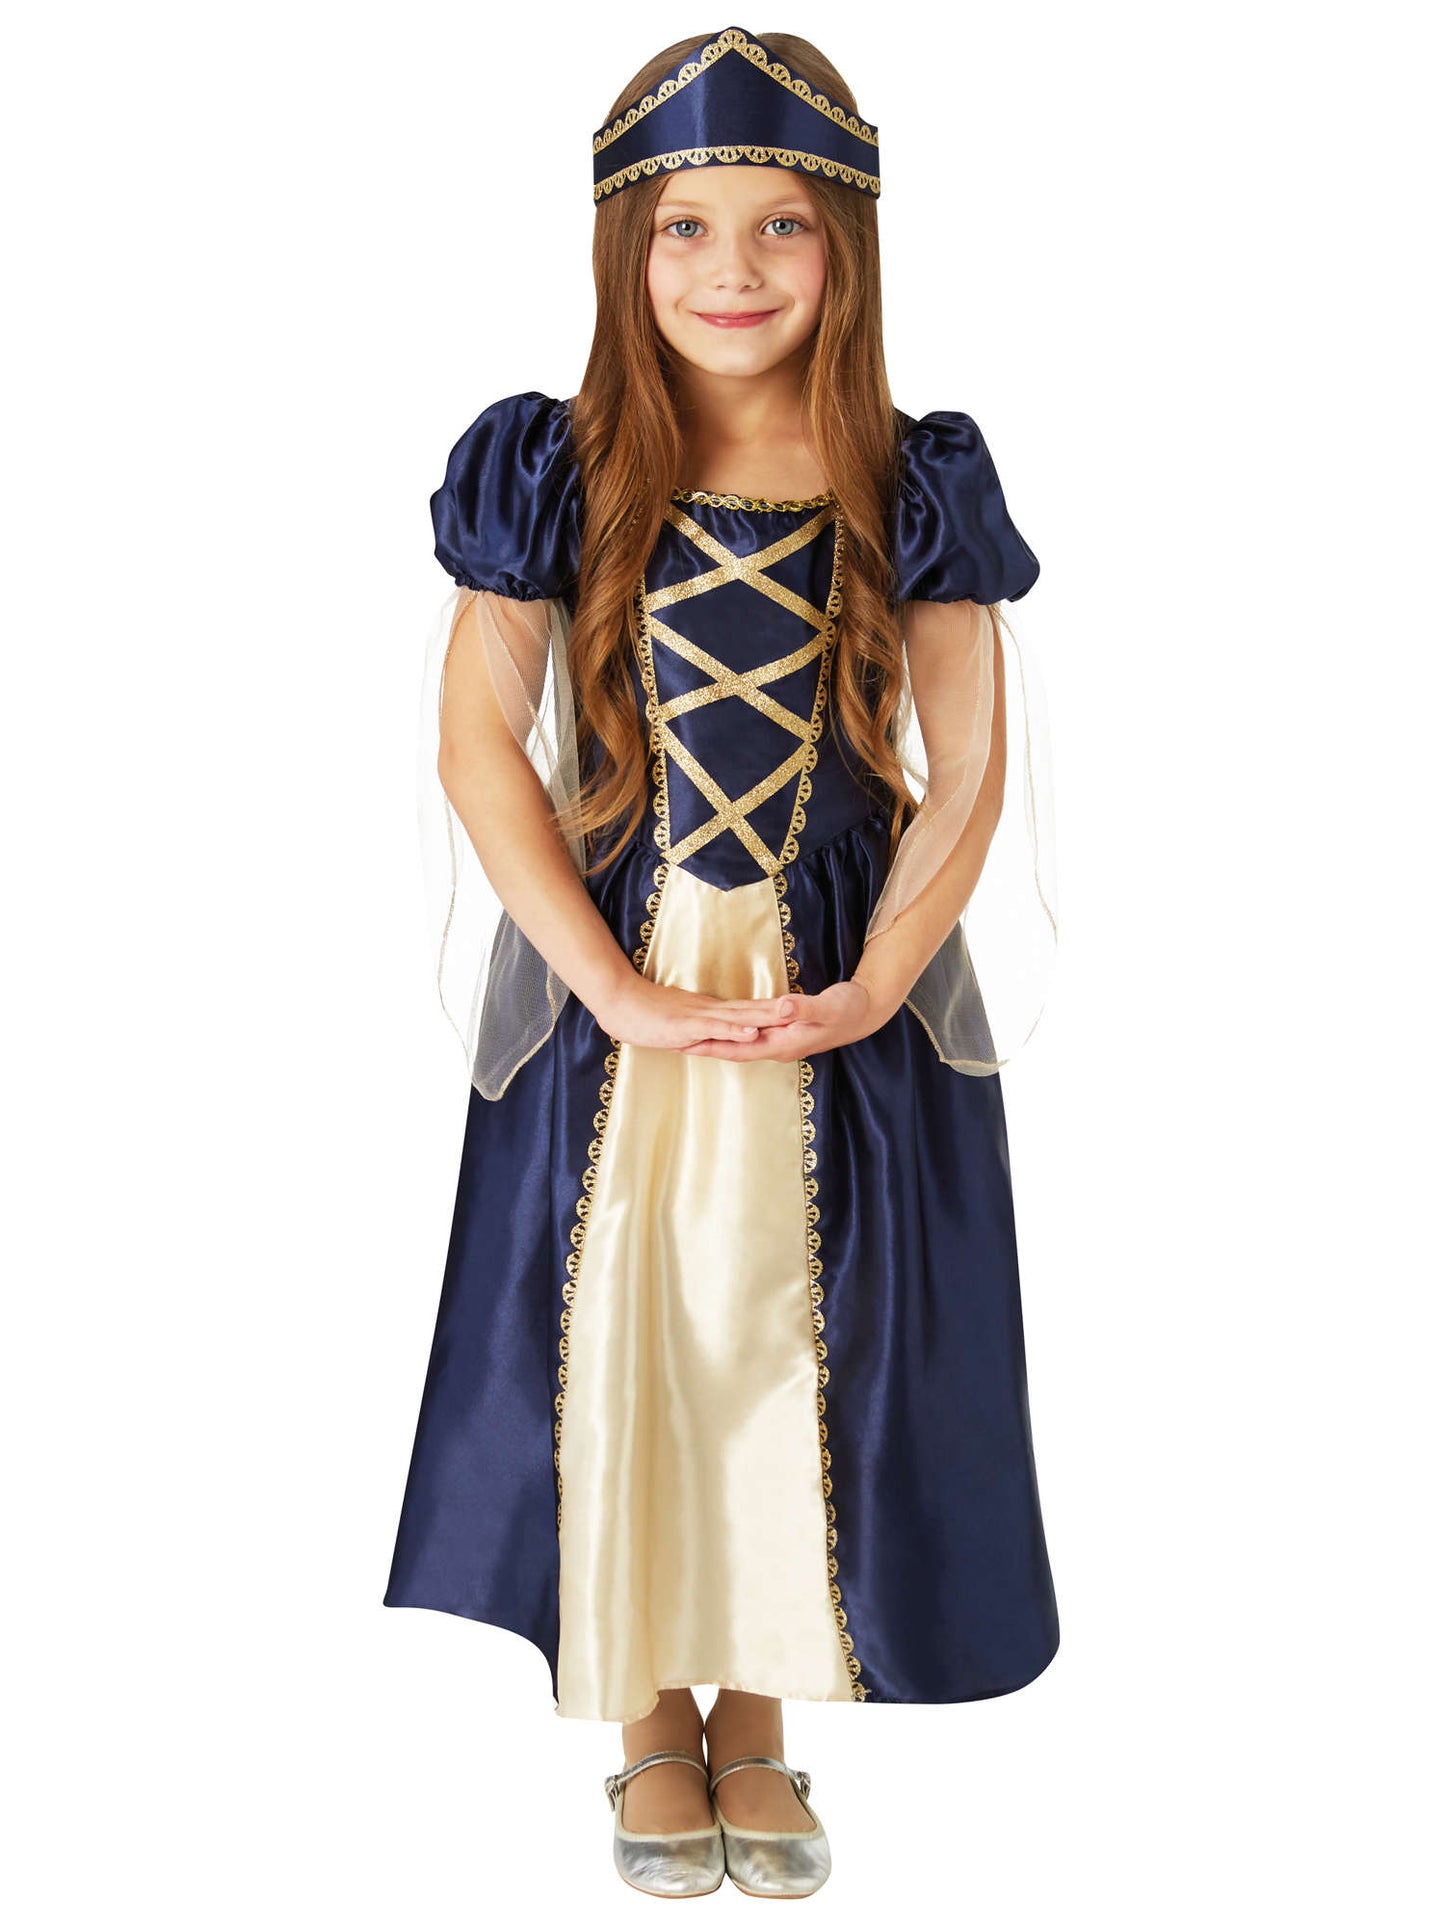 Girls Medieval Costumes